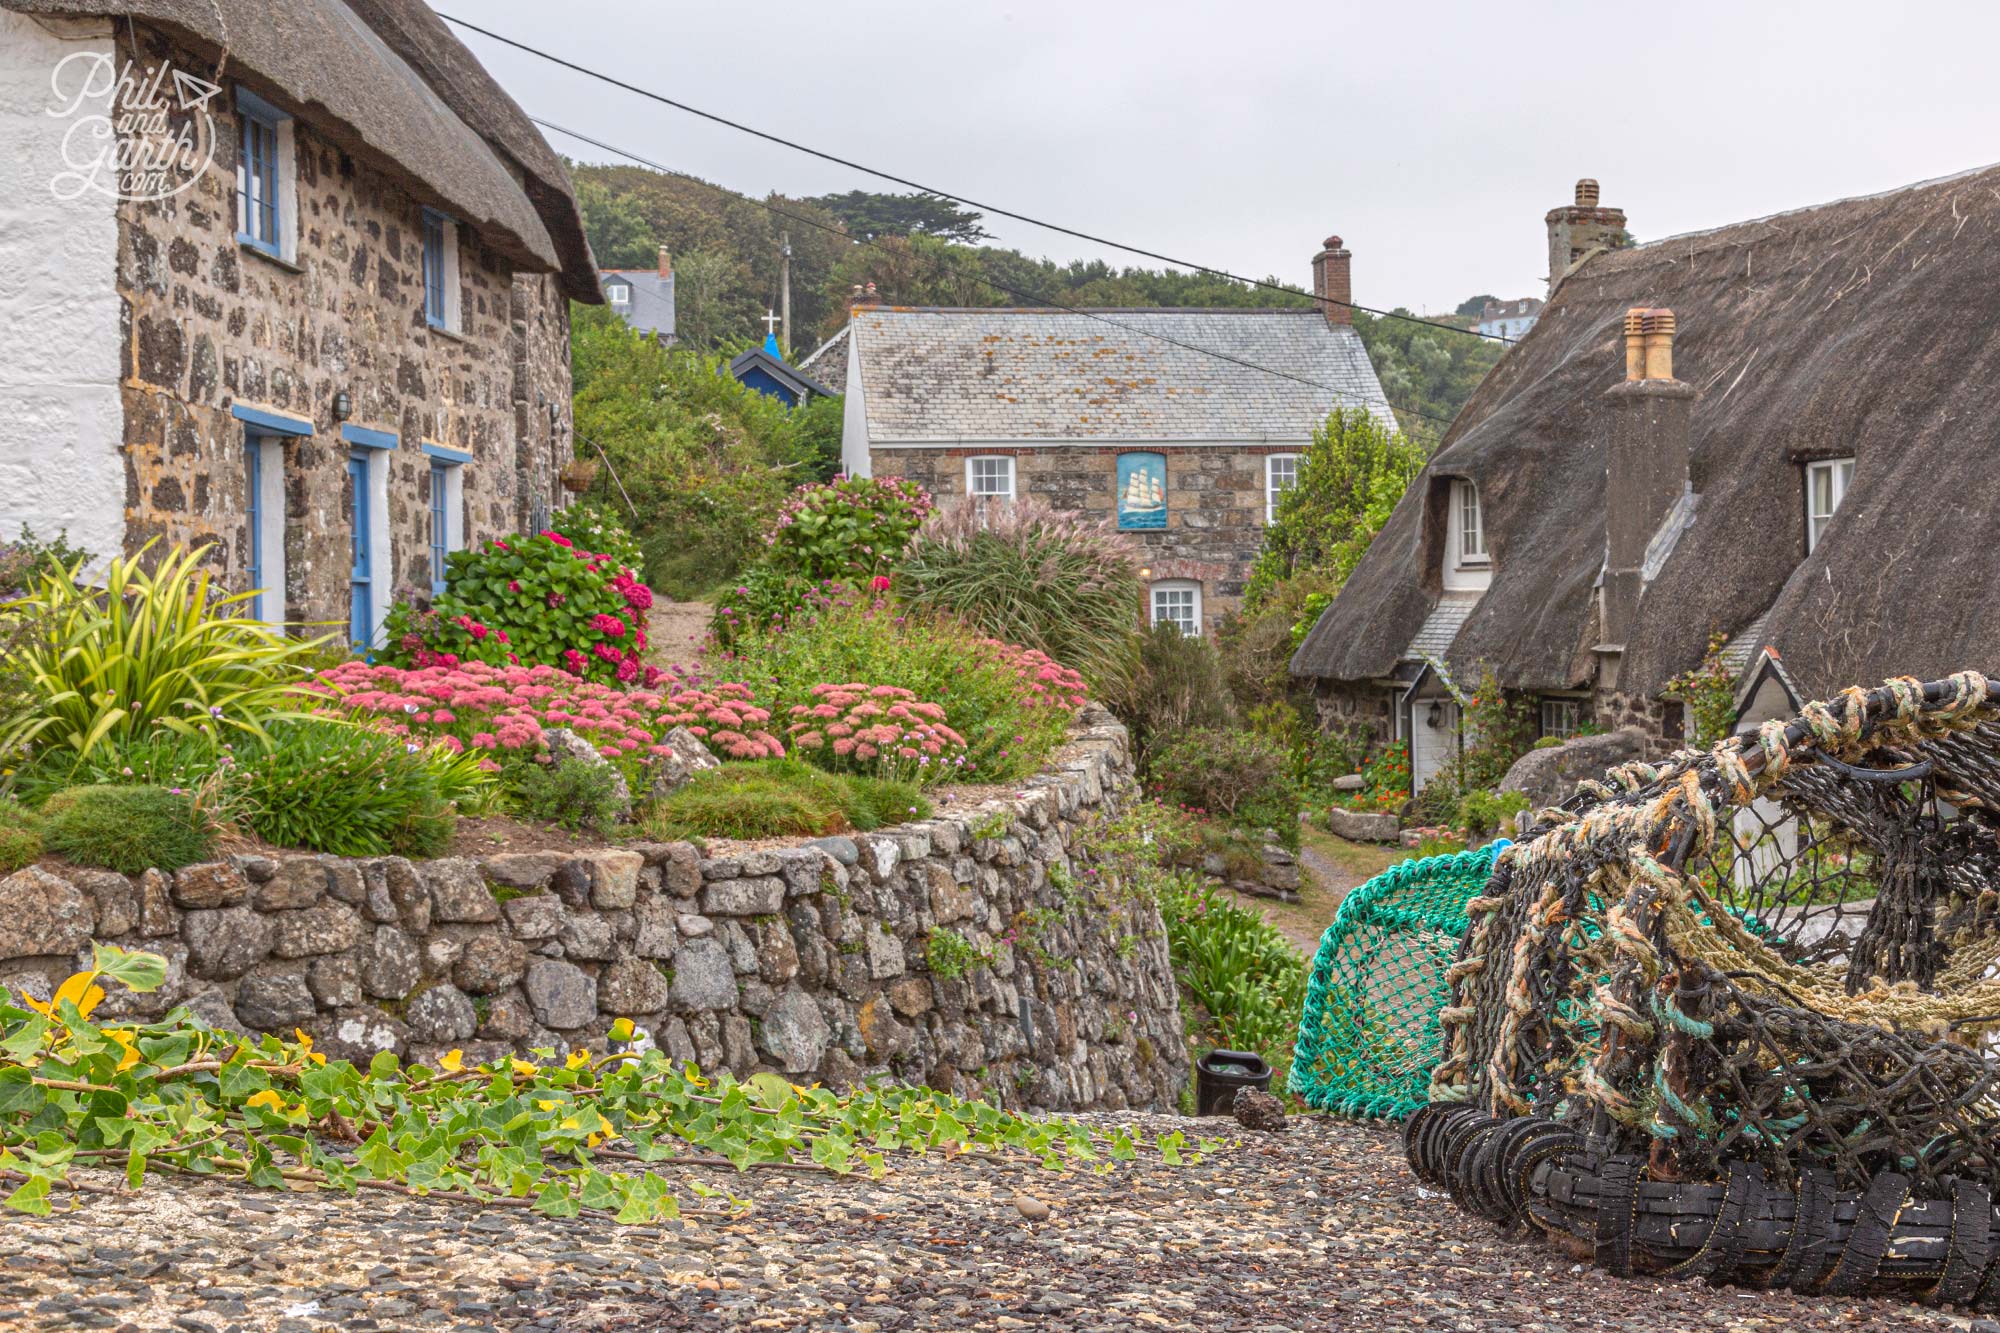 A cluster of lovely thatched cottages in Cadgwith Bay